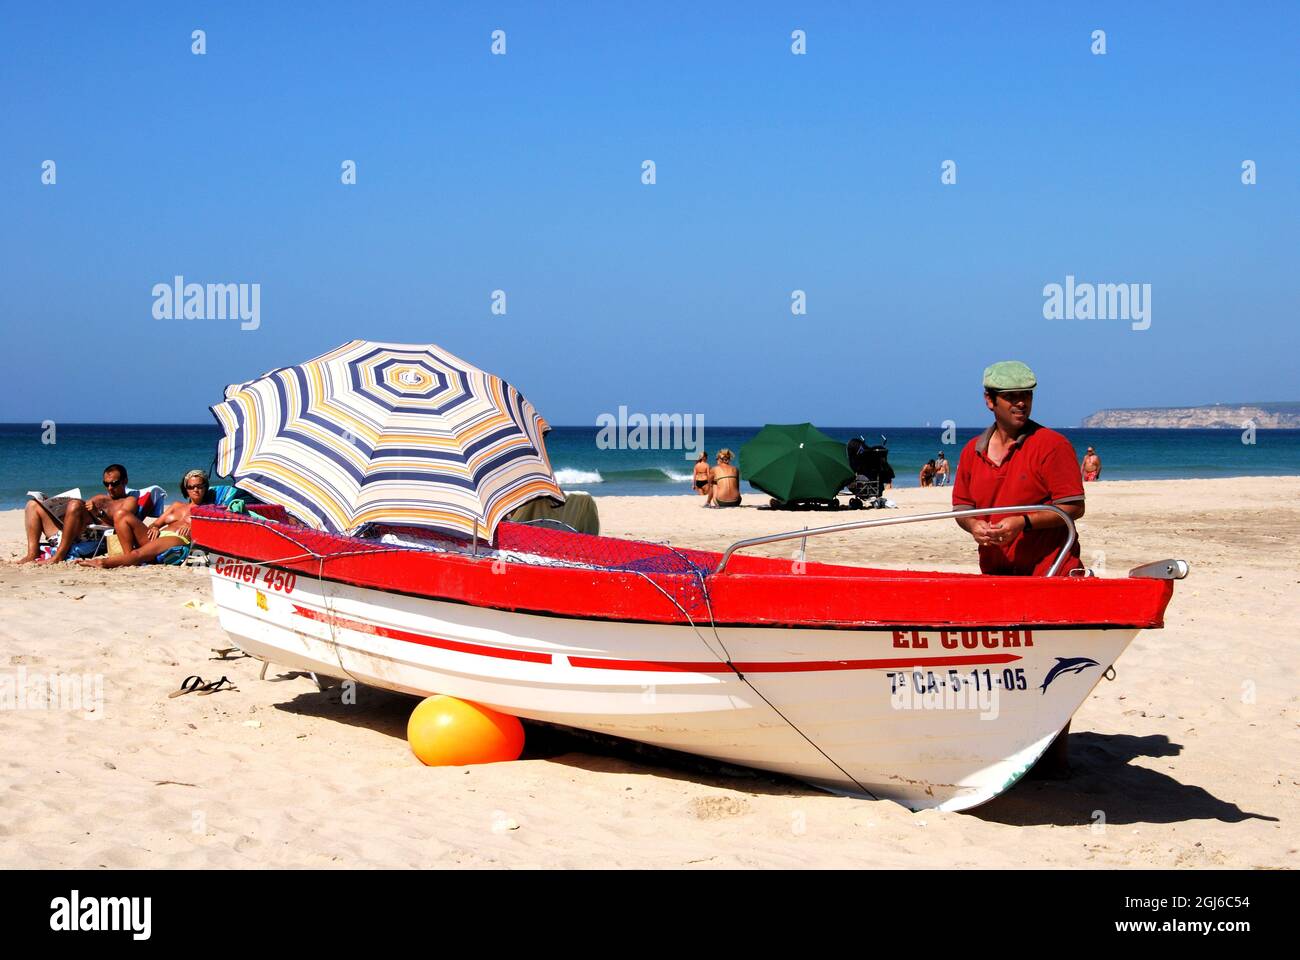 Spanish man standing by his traditional red and white wooden fishing boat on the beach with tourist enjoying the sunshine, Zahara de los Atunes, Spain Stock Photo